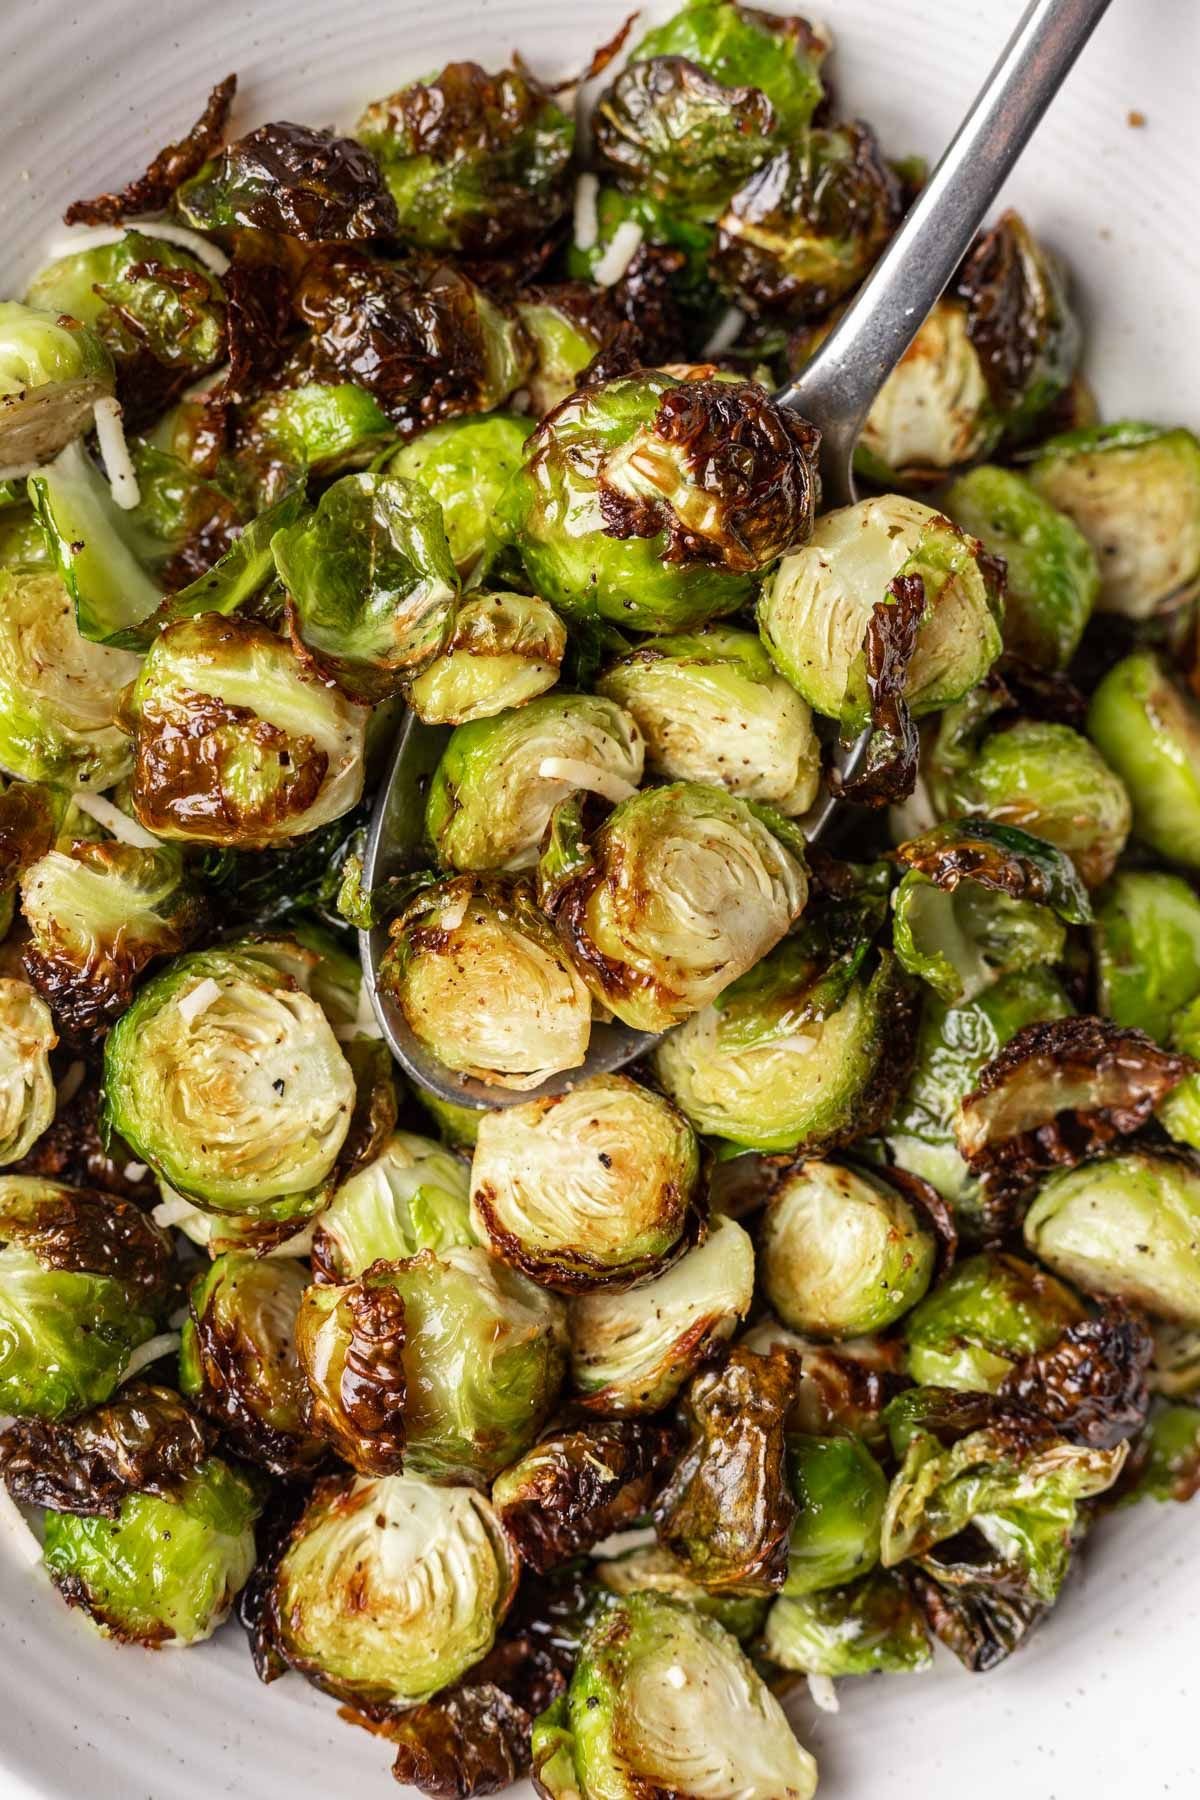 Bowl of crispy Brussels sprouts up close.